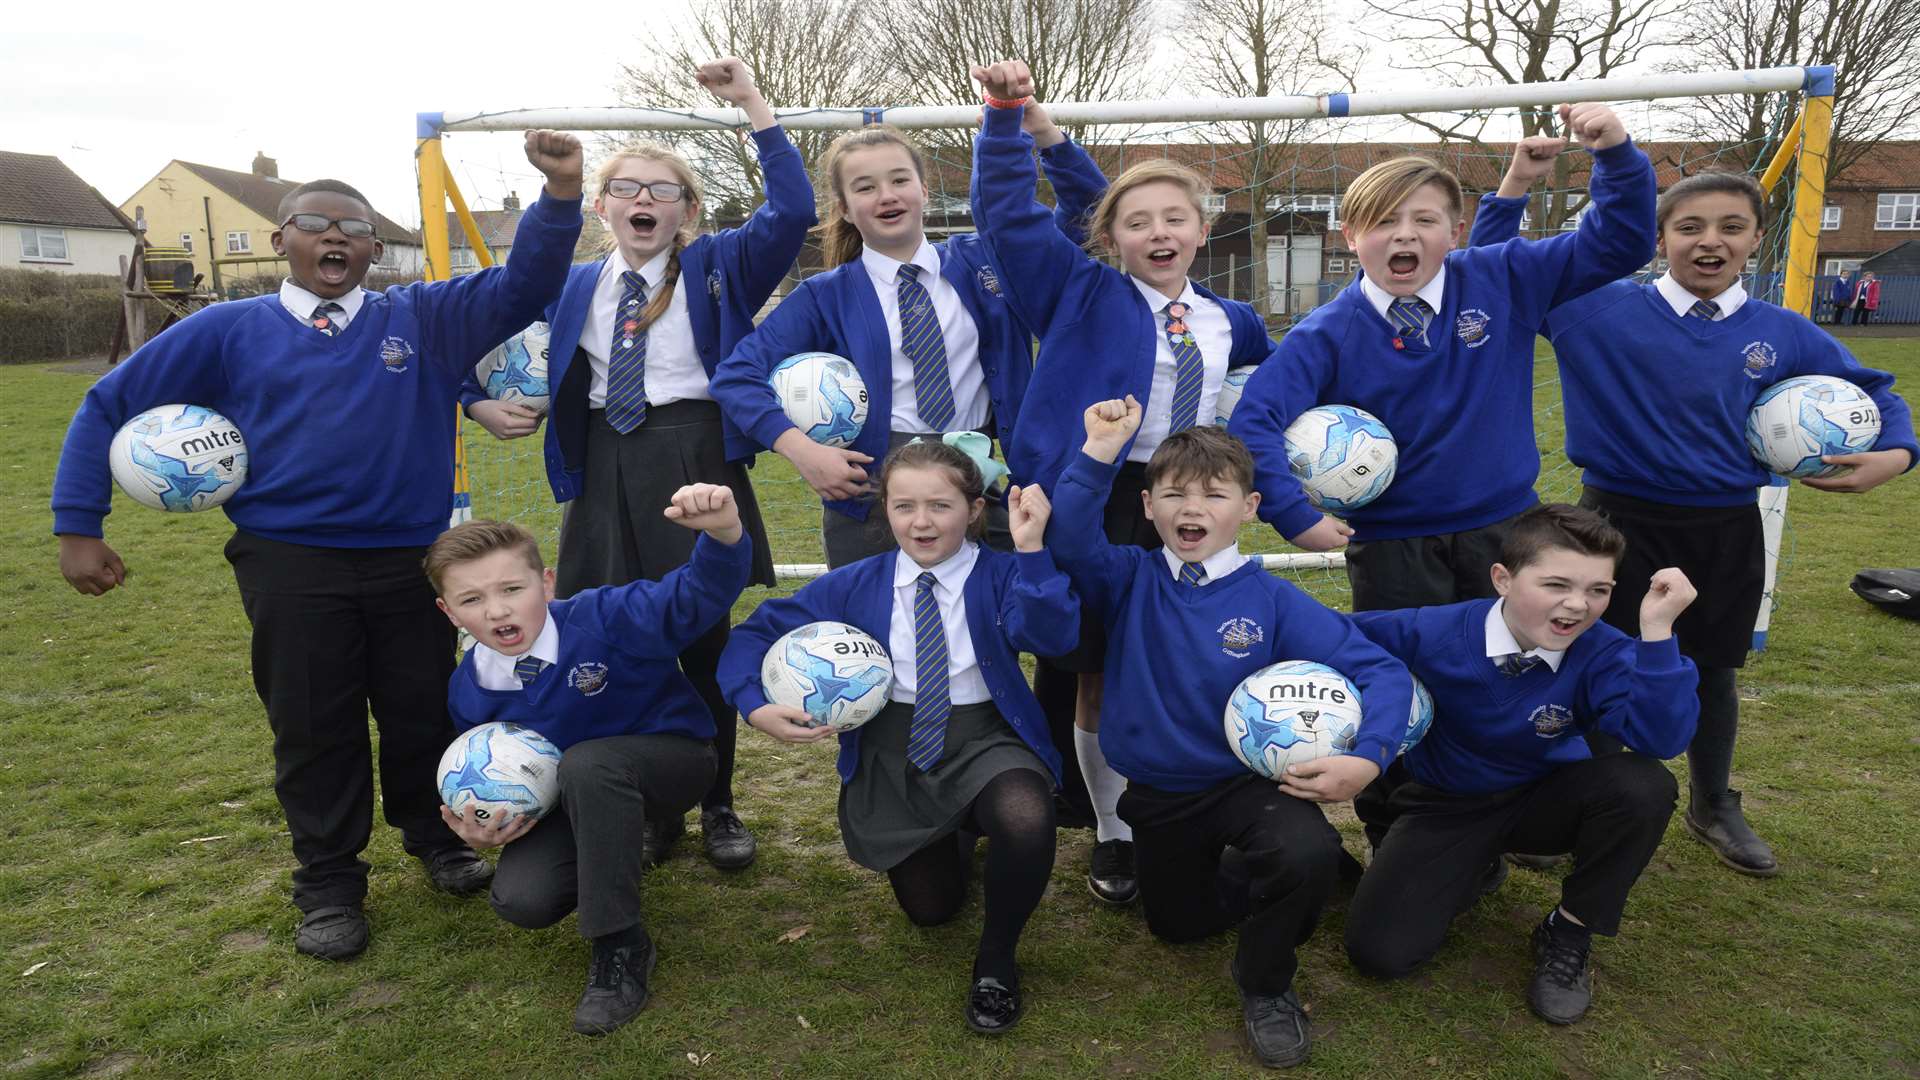 Pupils at Featherby Junior School will be cheering on Sean